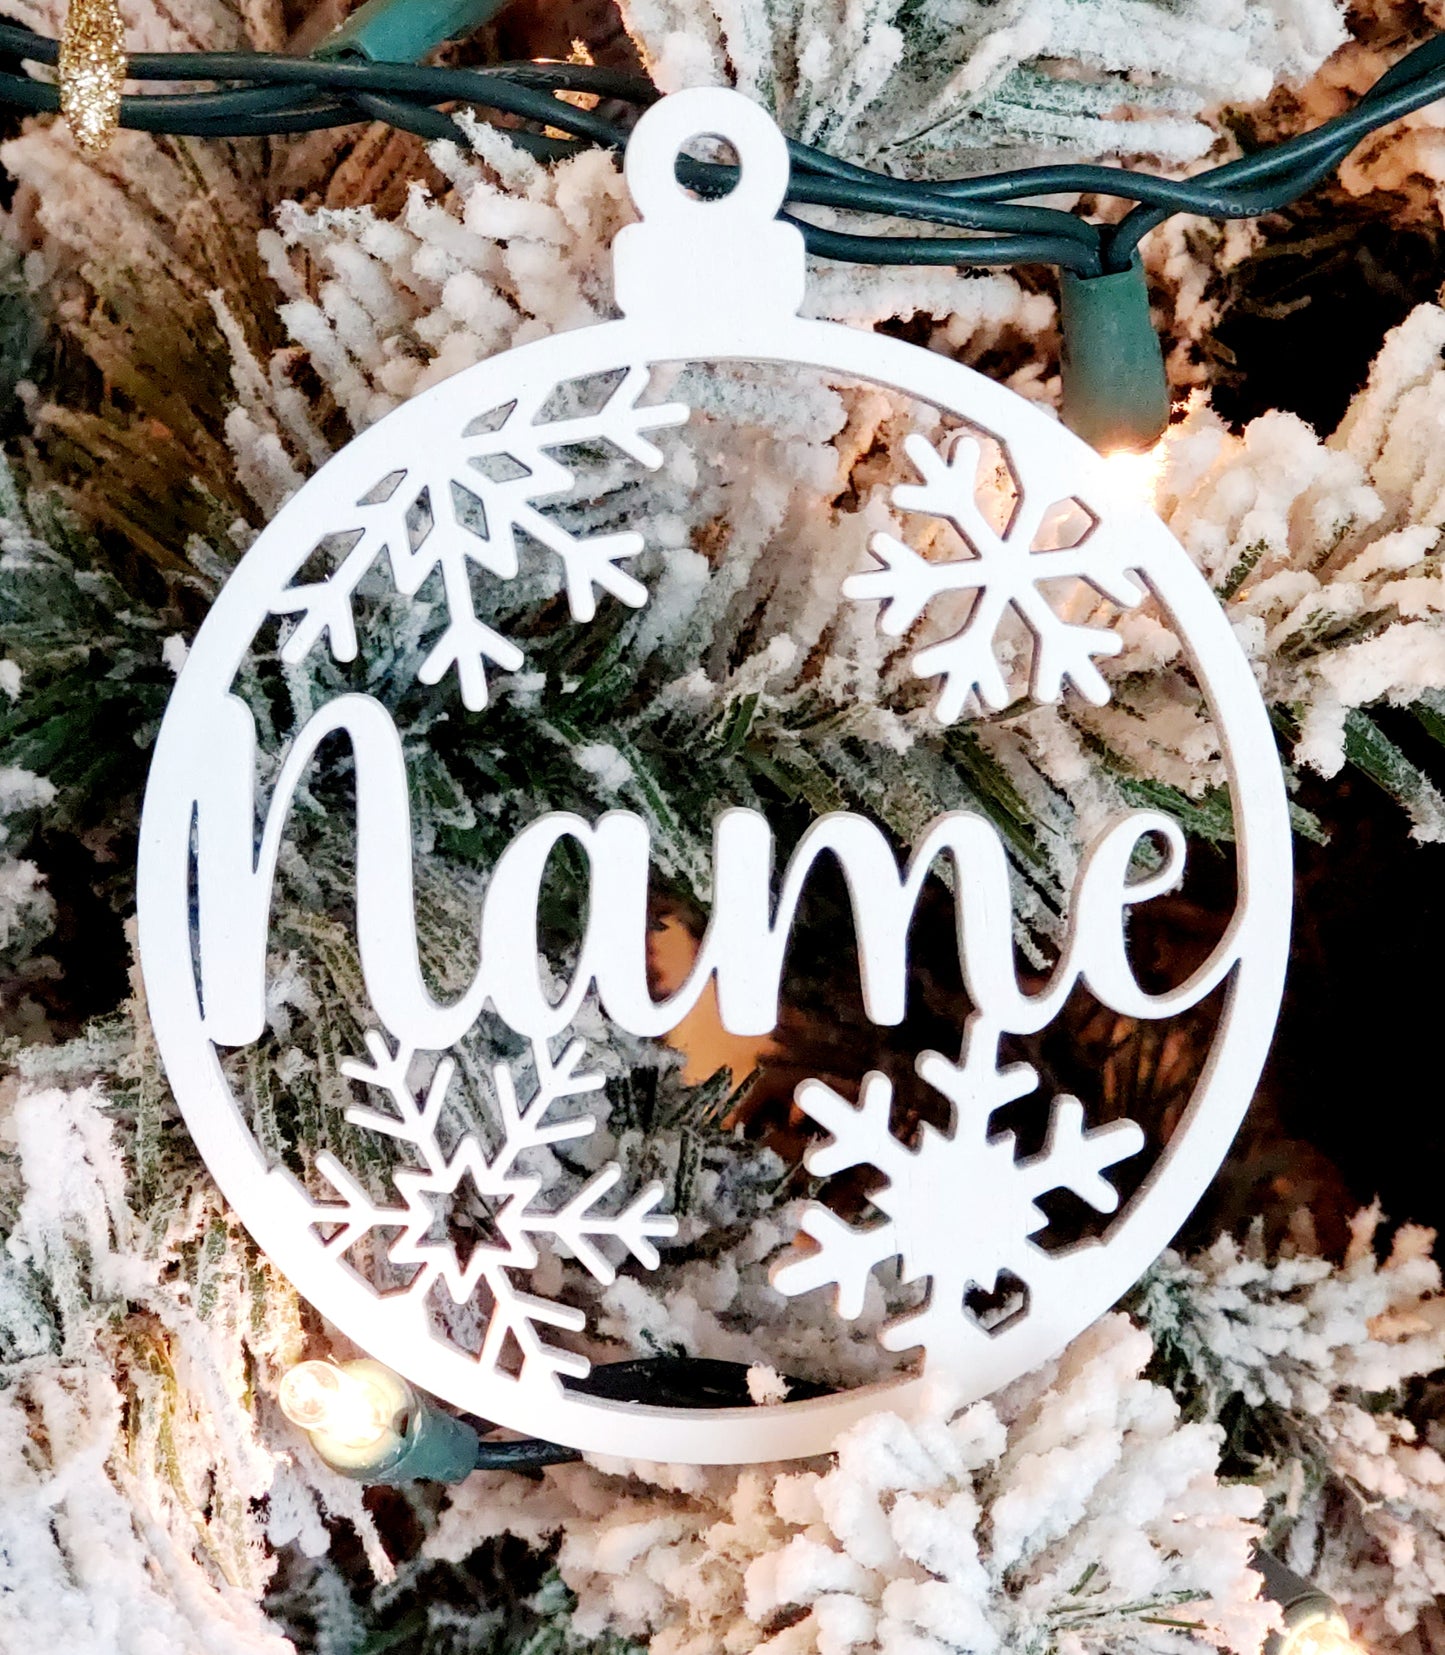 Personalized stocking tag/ornament